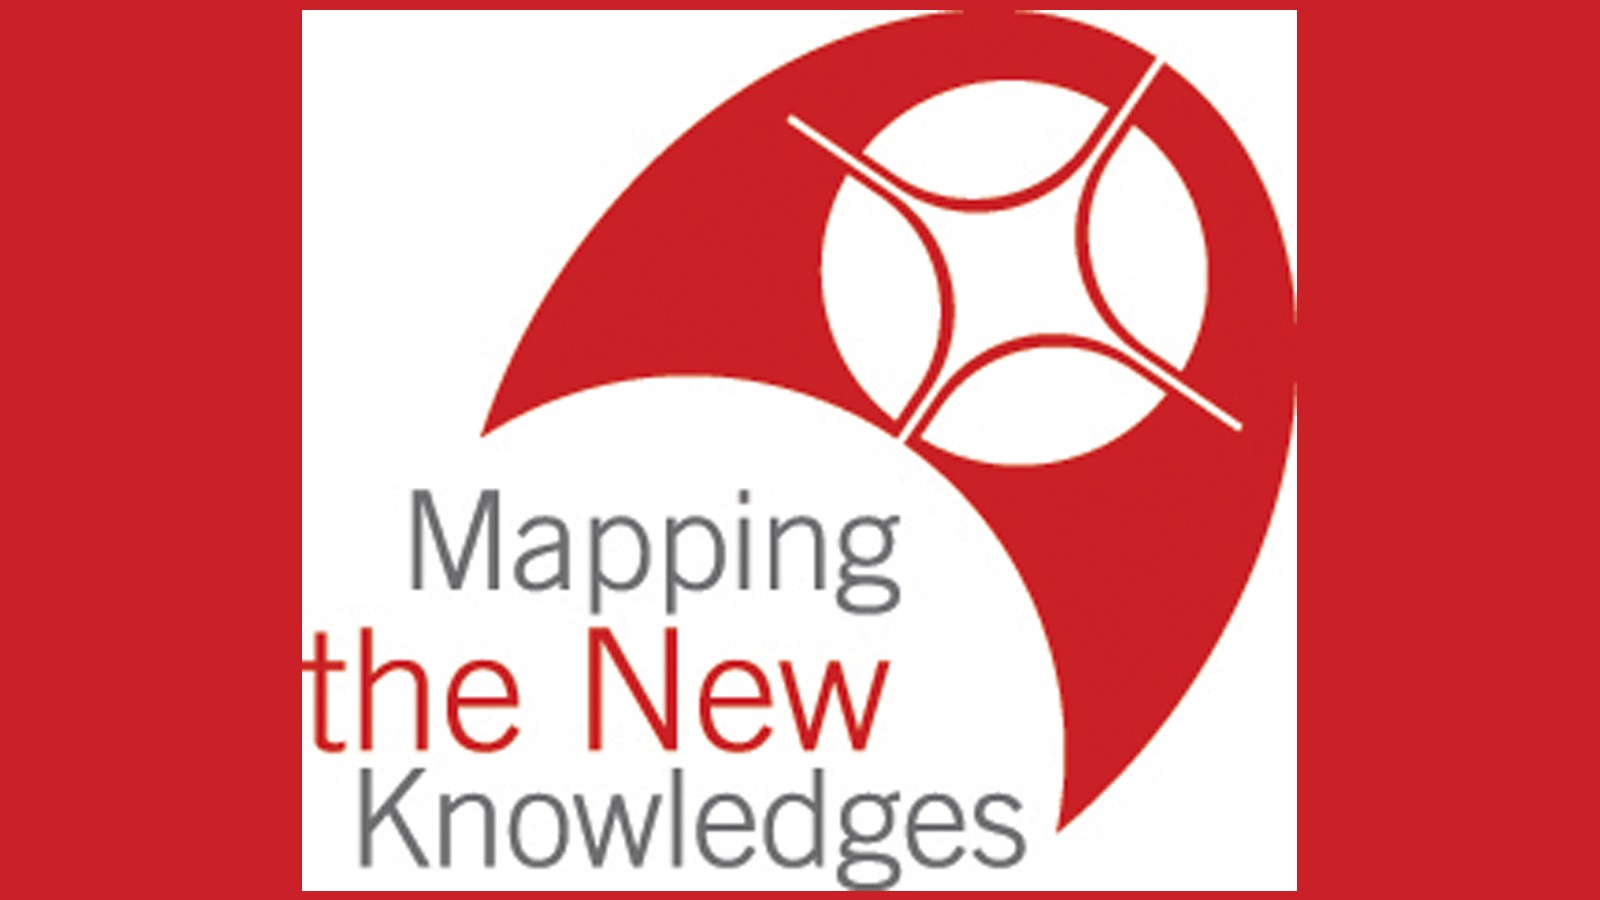 Mapping the New Knowledge graphic